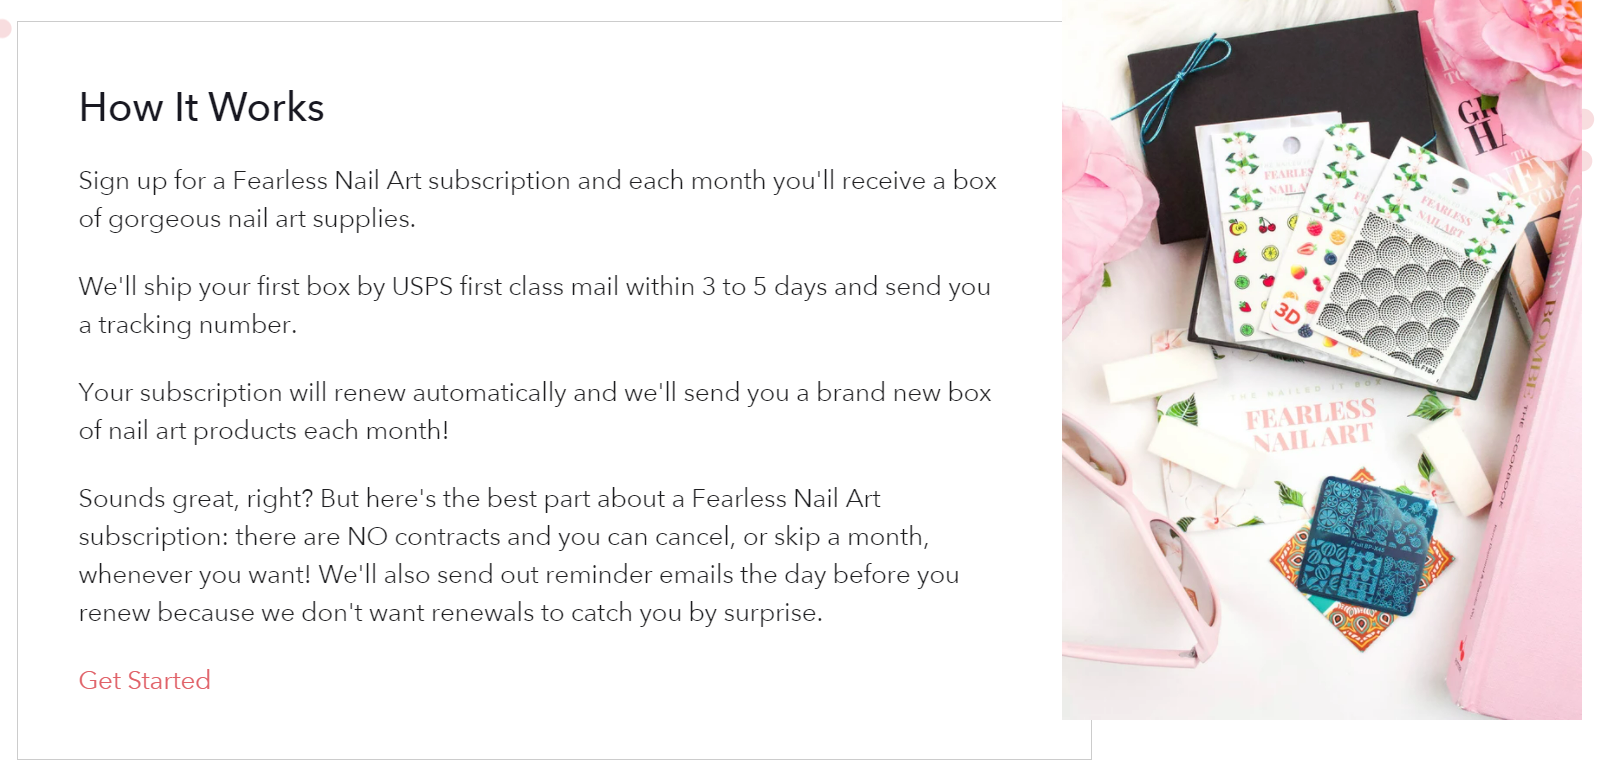 10. Nail Art Subscription Box by Scratch - wide 1